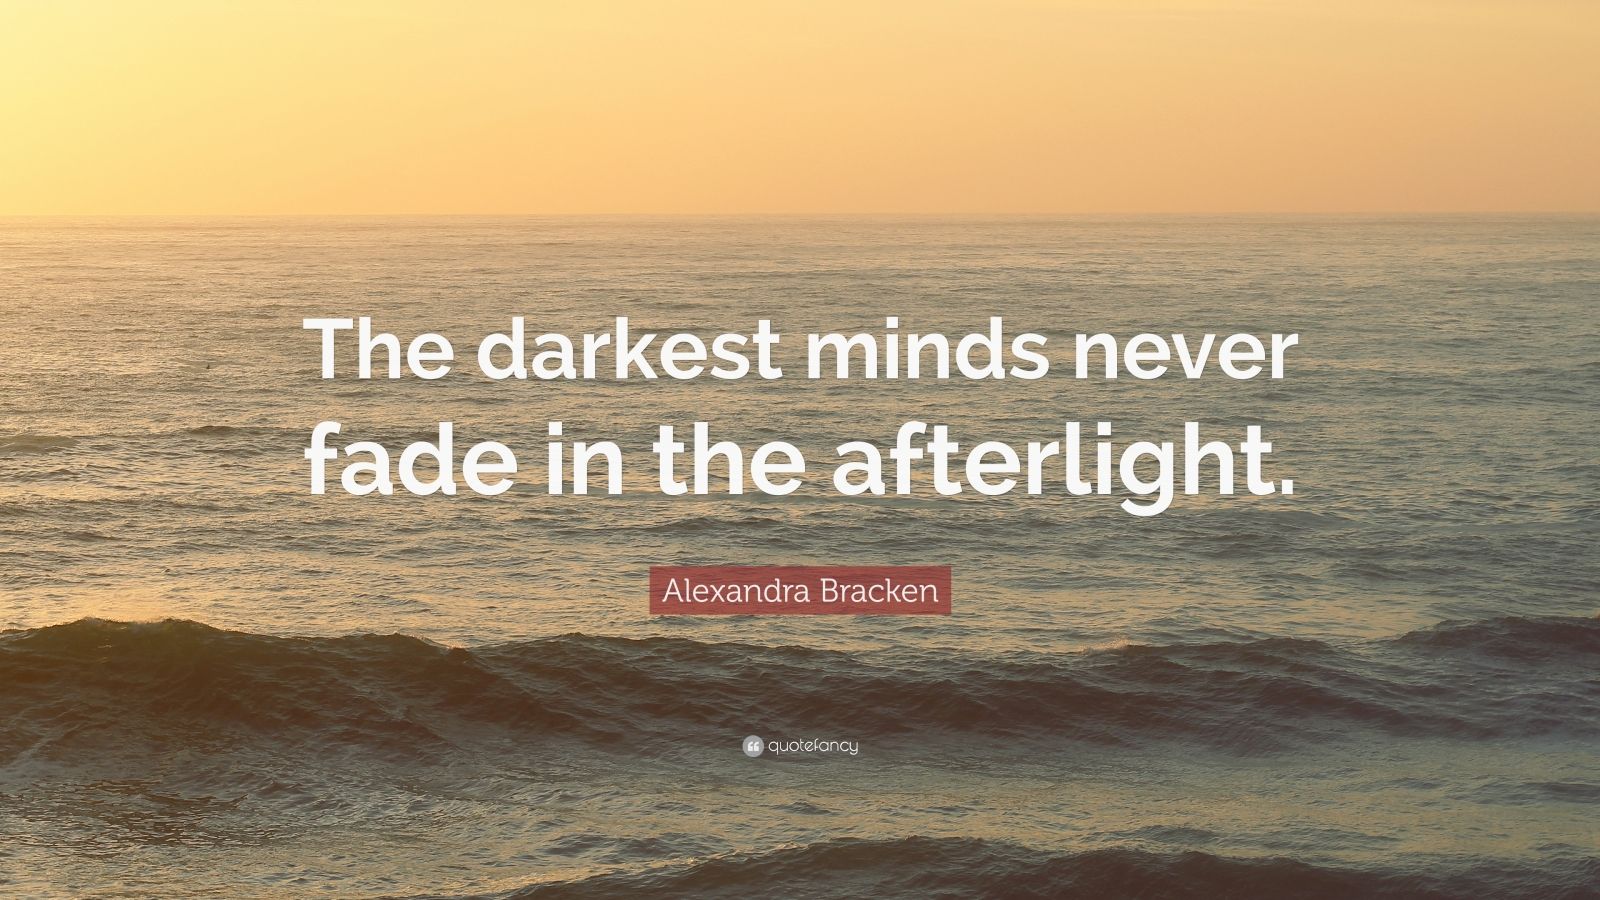 the darkest minds never fade in the afterlight